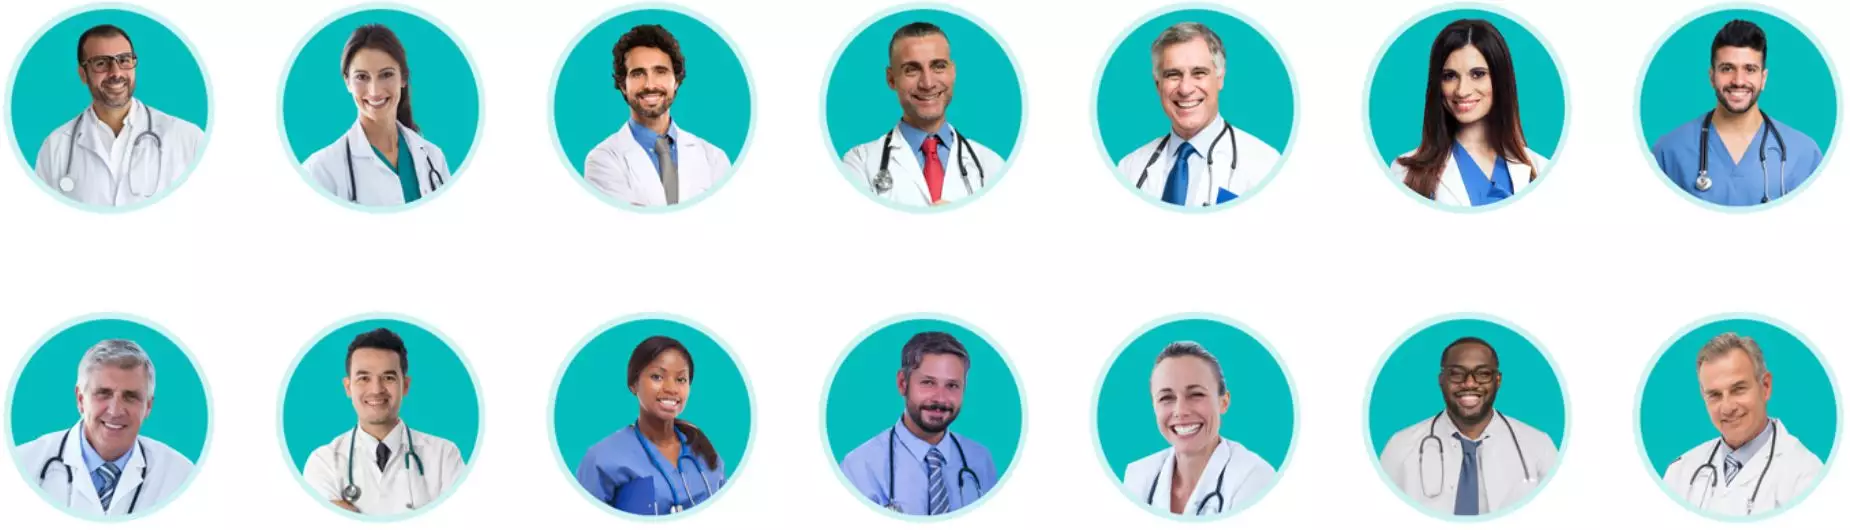 HRT Doctors Group provides HRT and TRT services in 41 states nationwide.